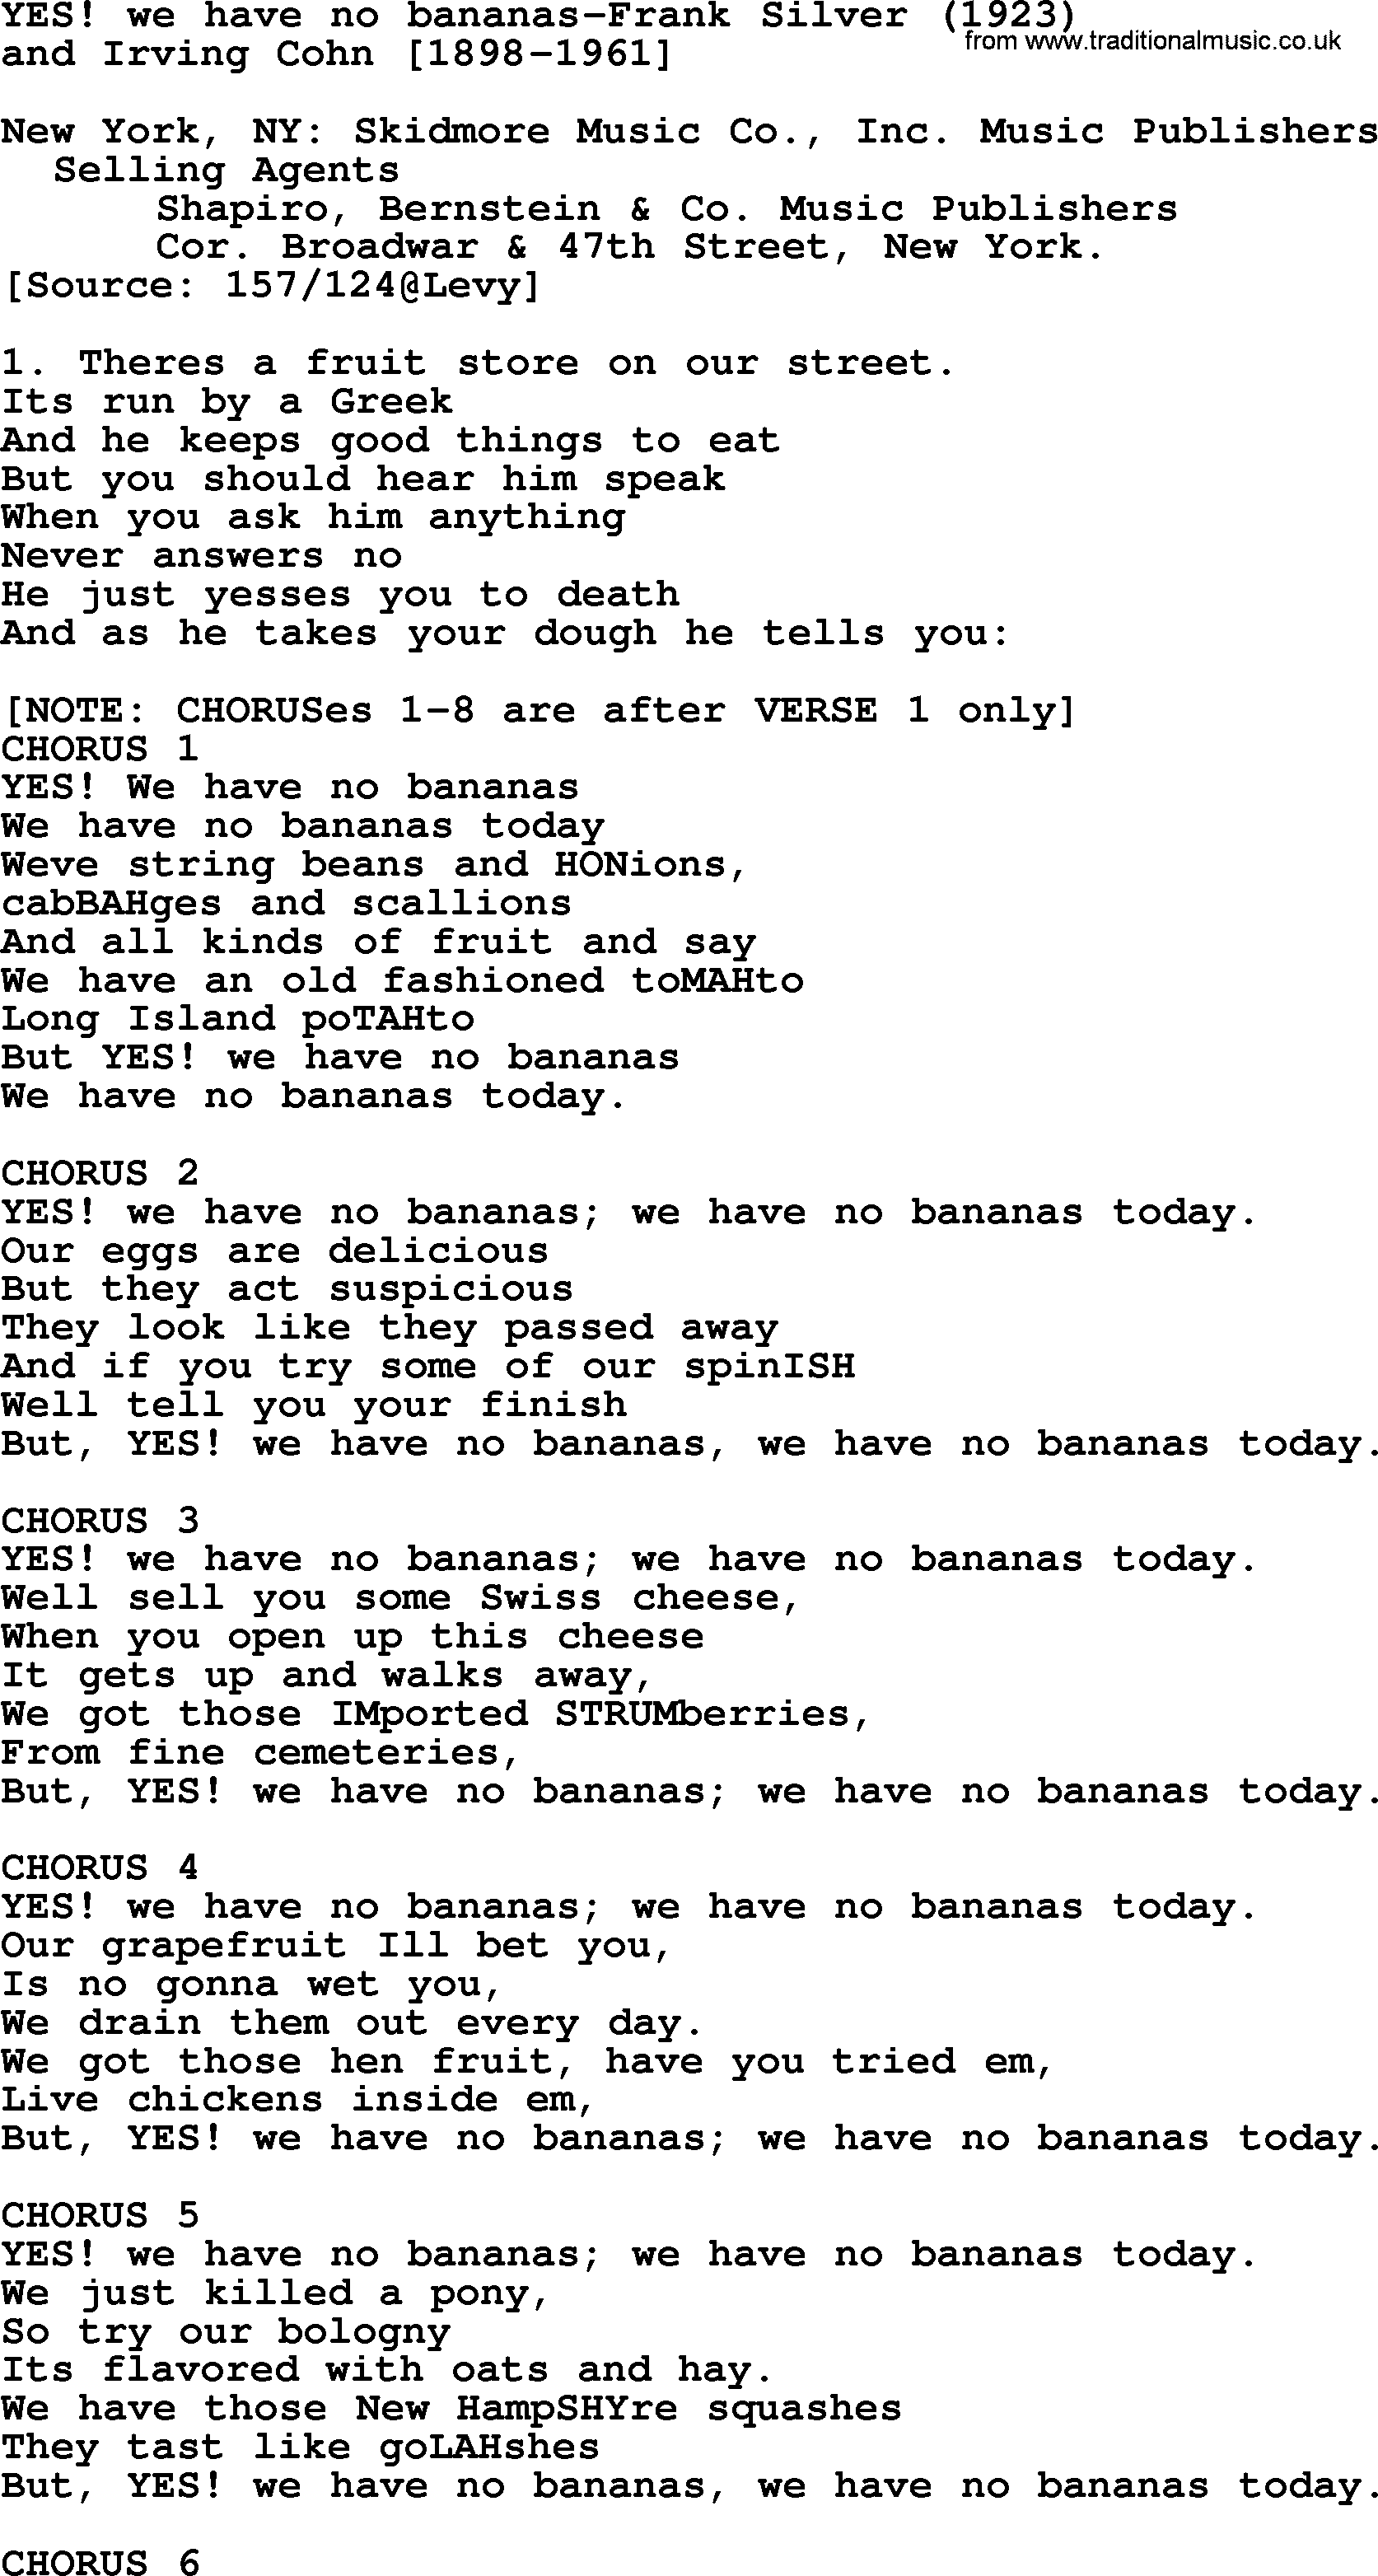 World War(WW1) One Song: Yes We Have No Bananas-Frank Silver 1923, lyrics and PDF